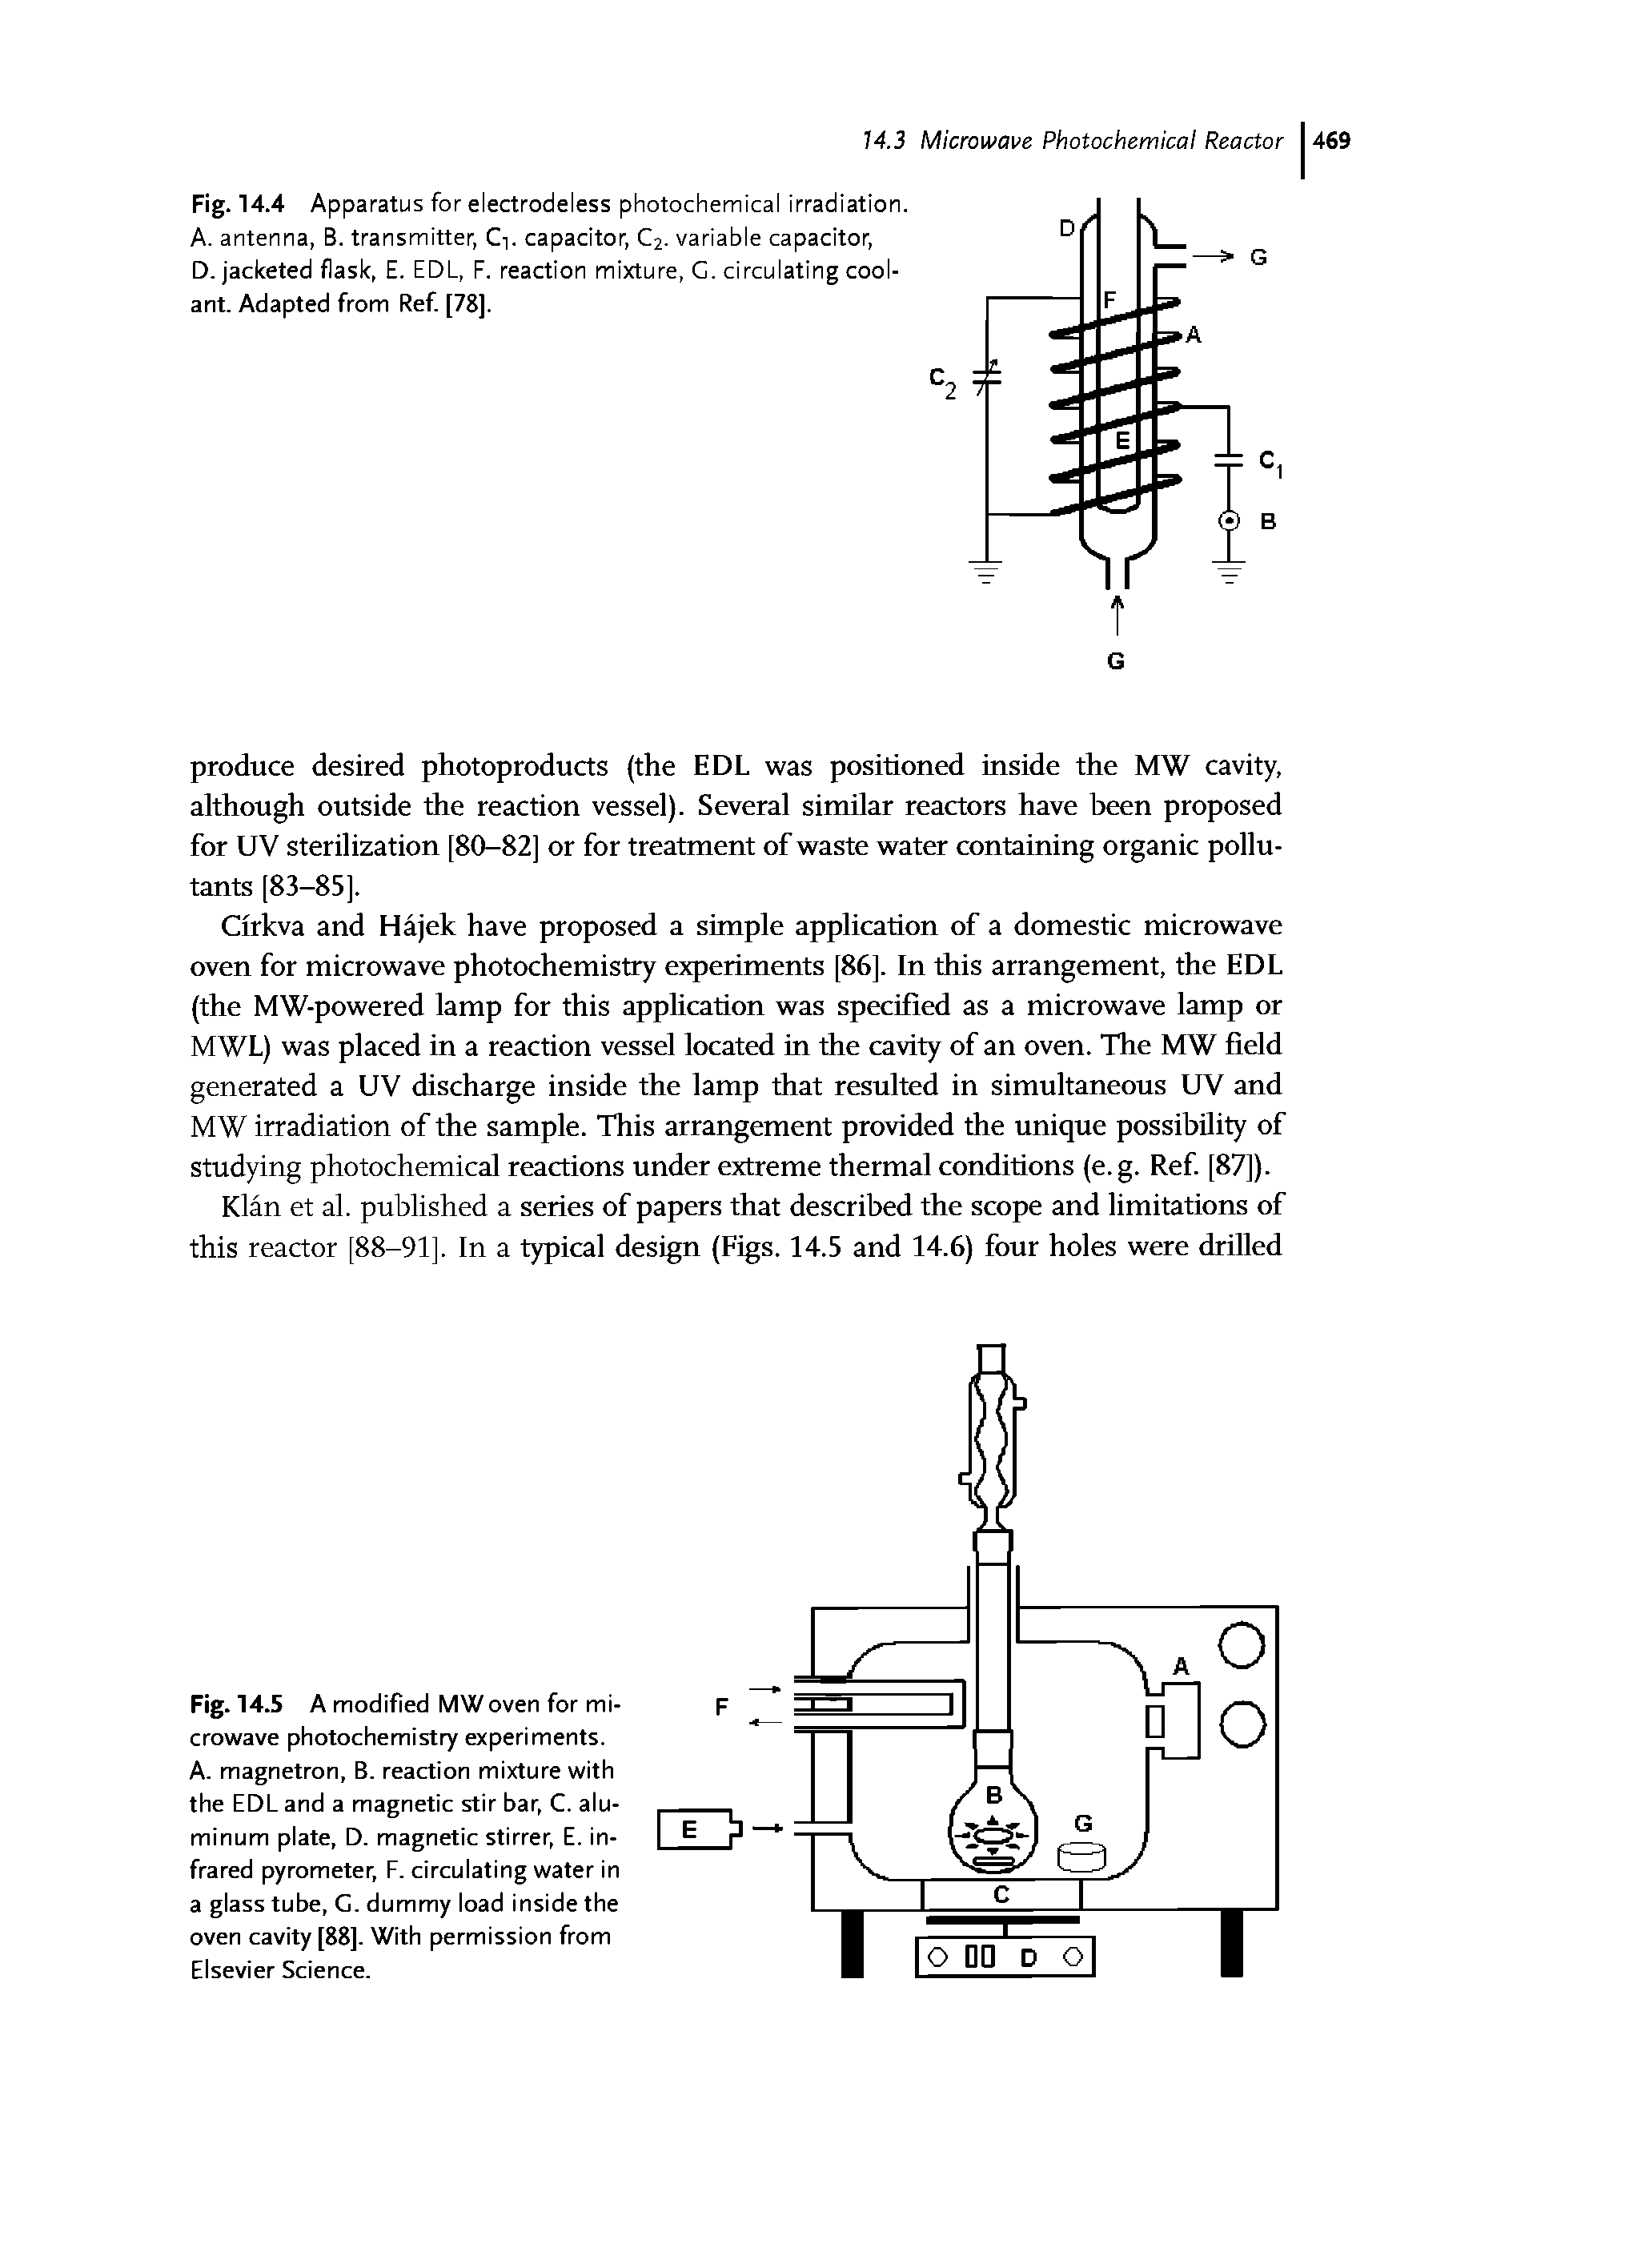 Fig. 14.5 A modified MW oven for microwave photochemistry experiments. A. magnetron, B. reaction mixture with the EDL and a magnetic stir bar, C. aluminum plate, D. magnetic stirrer, E. infrared pyrometer, F. circulating water in a glass tube, G. dummy load inside the oven cavity [88]. With permission from Elsevier Science.